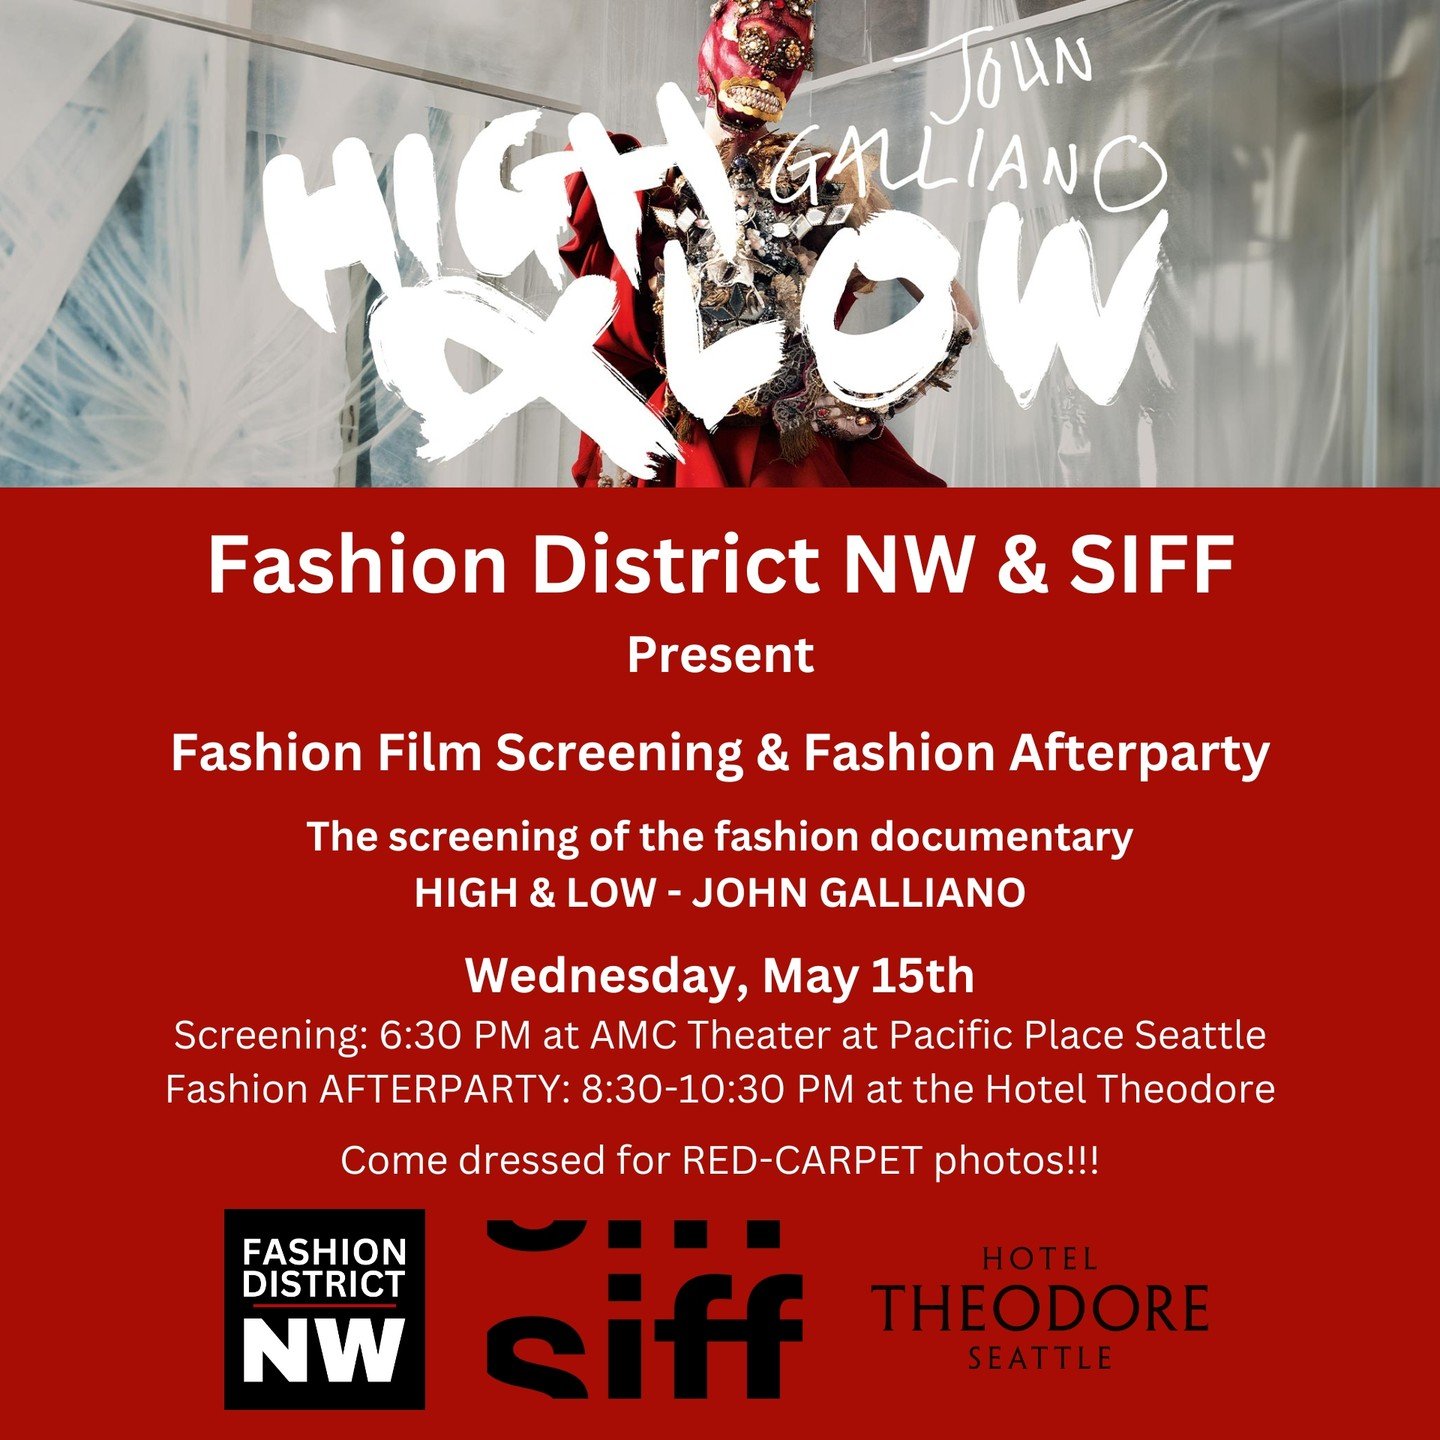 Fashion District NW &amp; the Seattle International Film Festival (SIFF) have partnered for the screening of a fashion documentary HIGH &amp; LOW - John Galliano at the Pacific Place AMC Theater and FASHION AFTERPARTY at the Hotel Theodore post scree